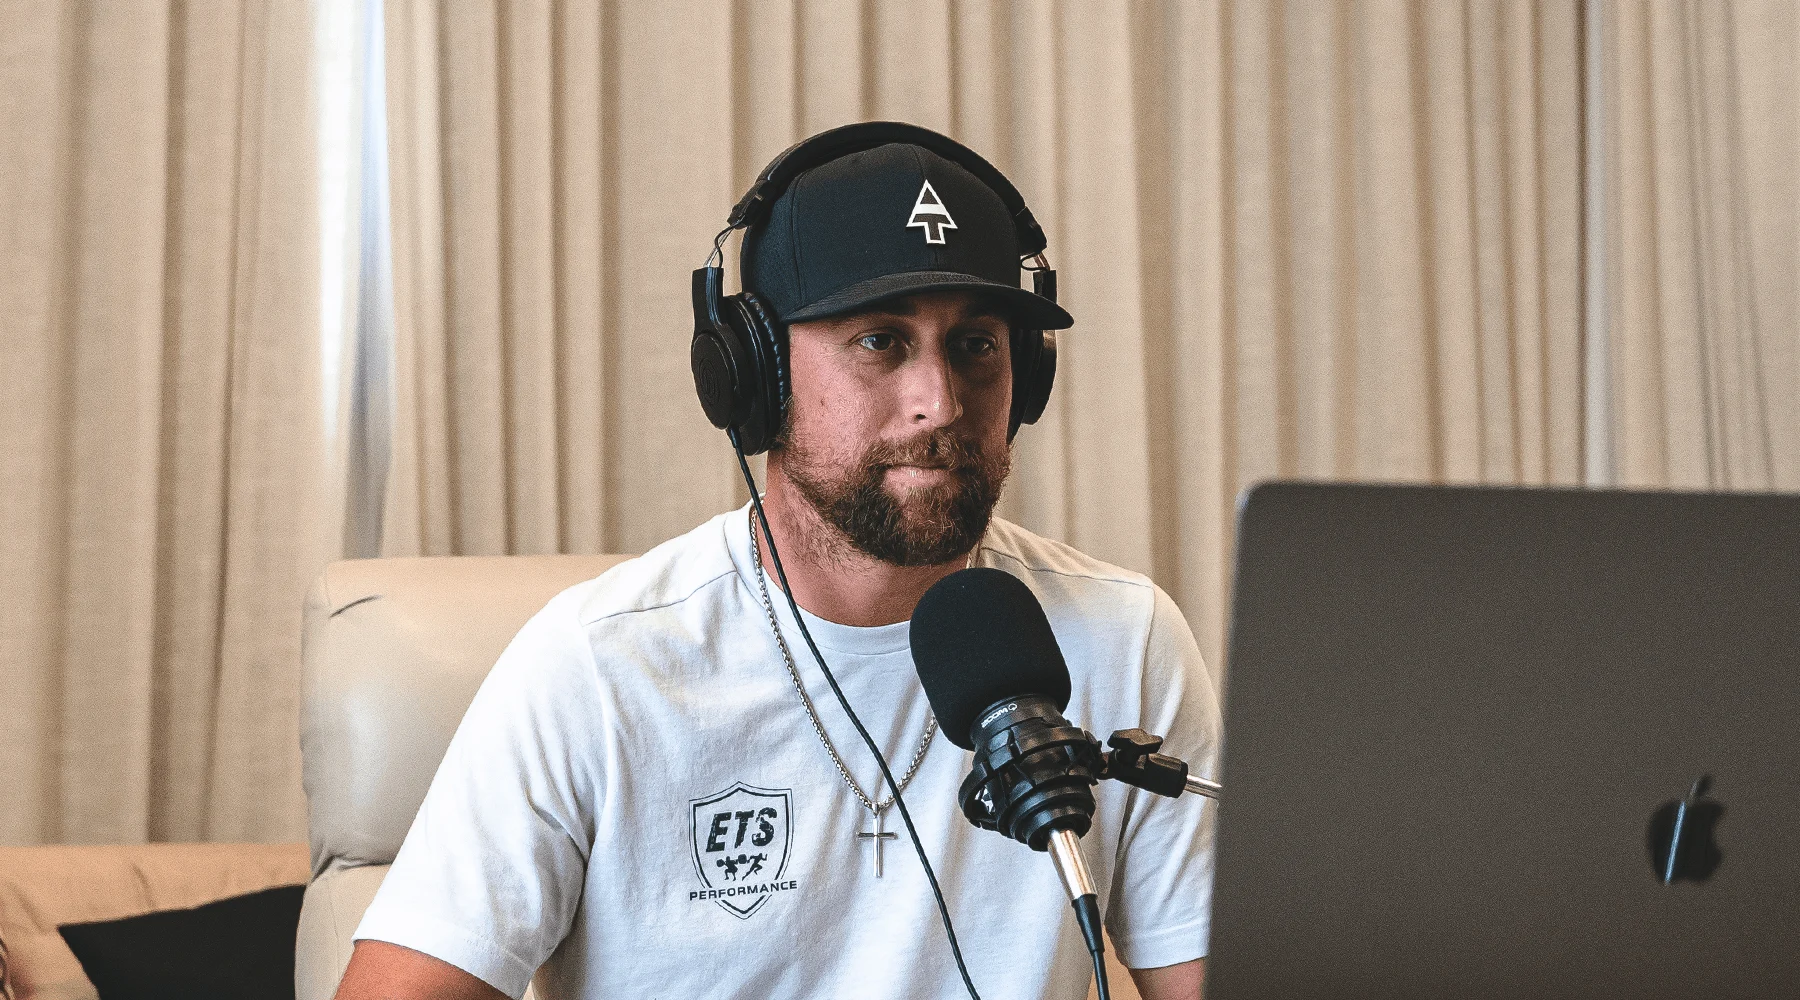 Podcast 166: Adam Thielen on Journey from Overlooked Division II Athlete to NFL All-Pro